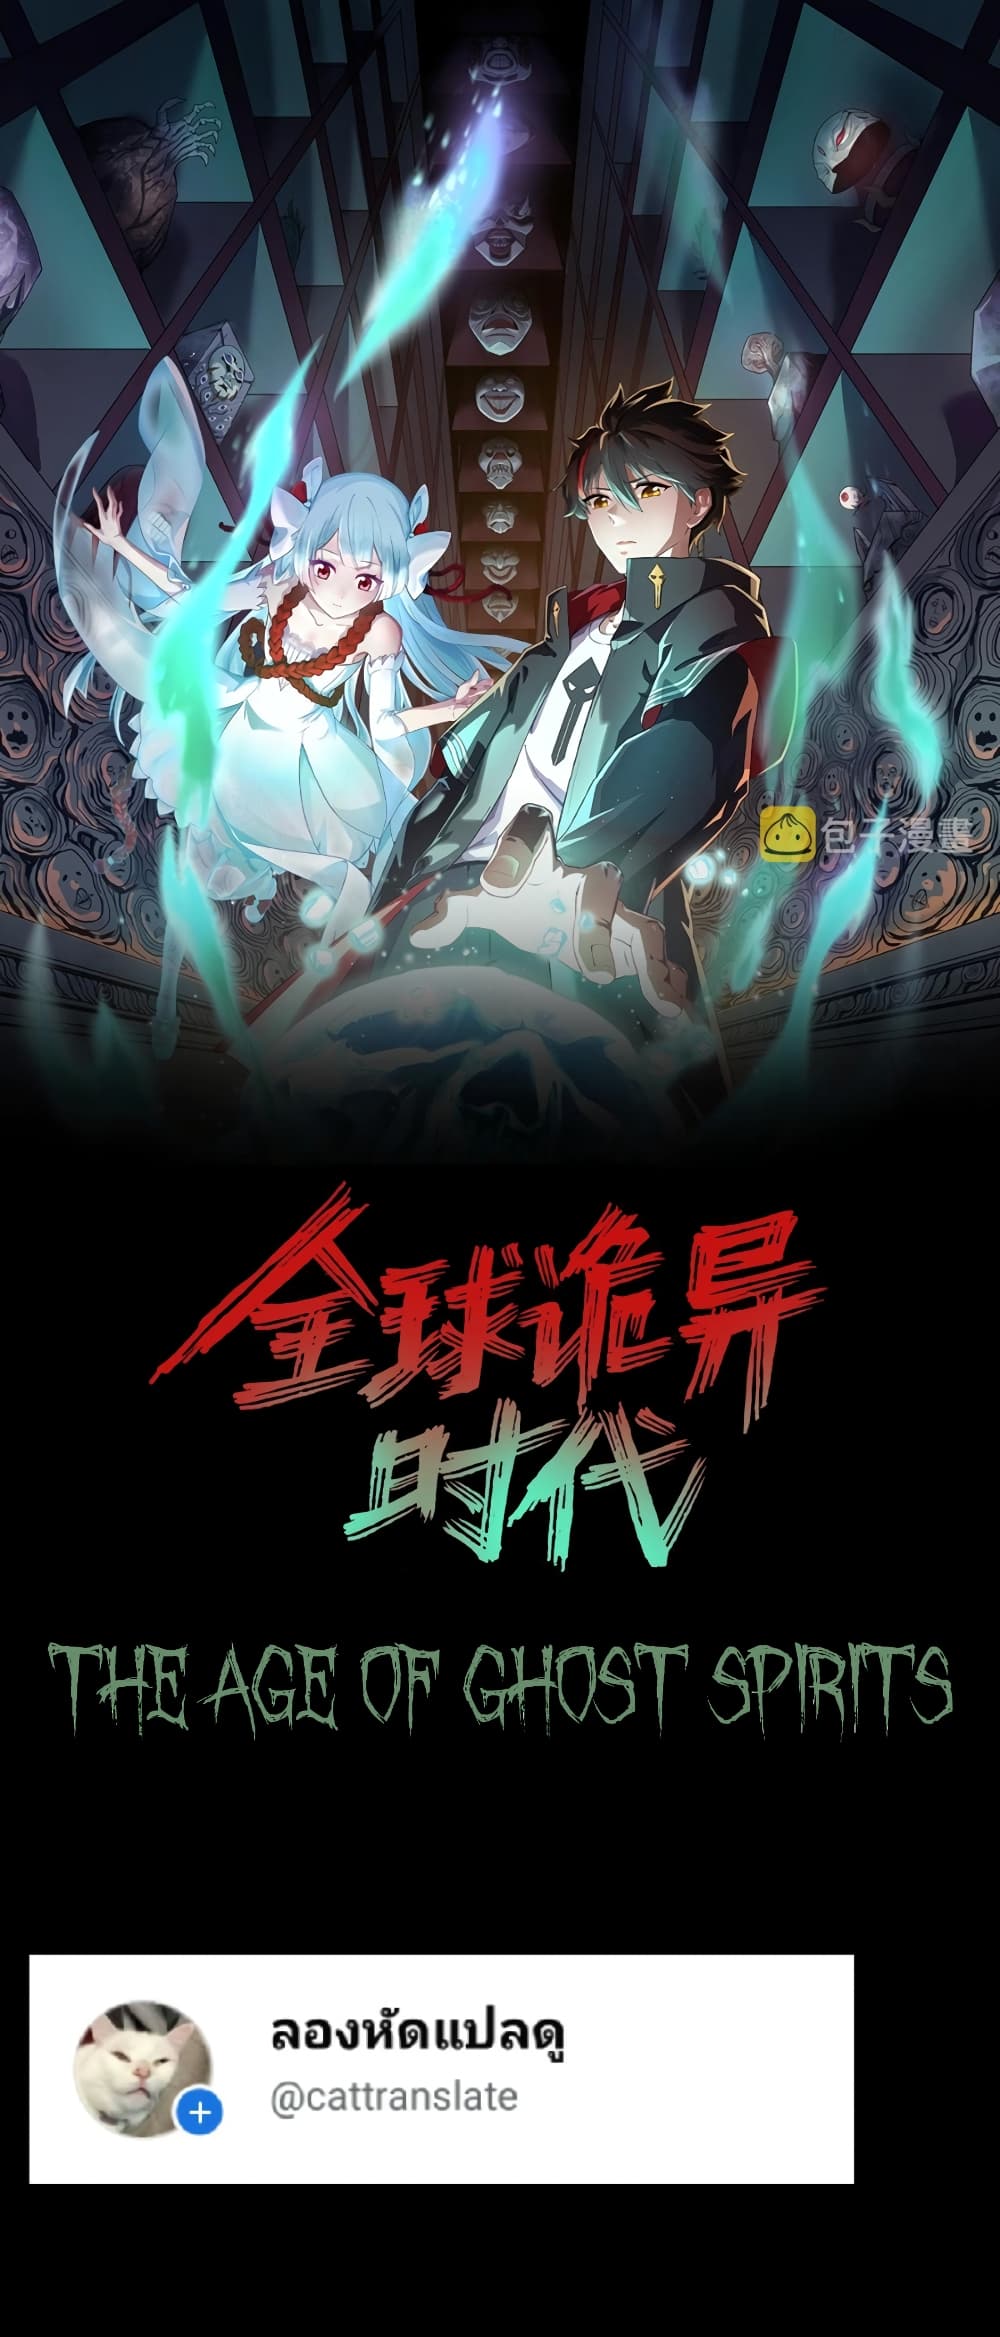 The Age of Ghost Spirits à¸à¸­à¸à¸à¸µà¹ 38 (1)